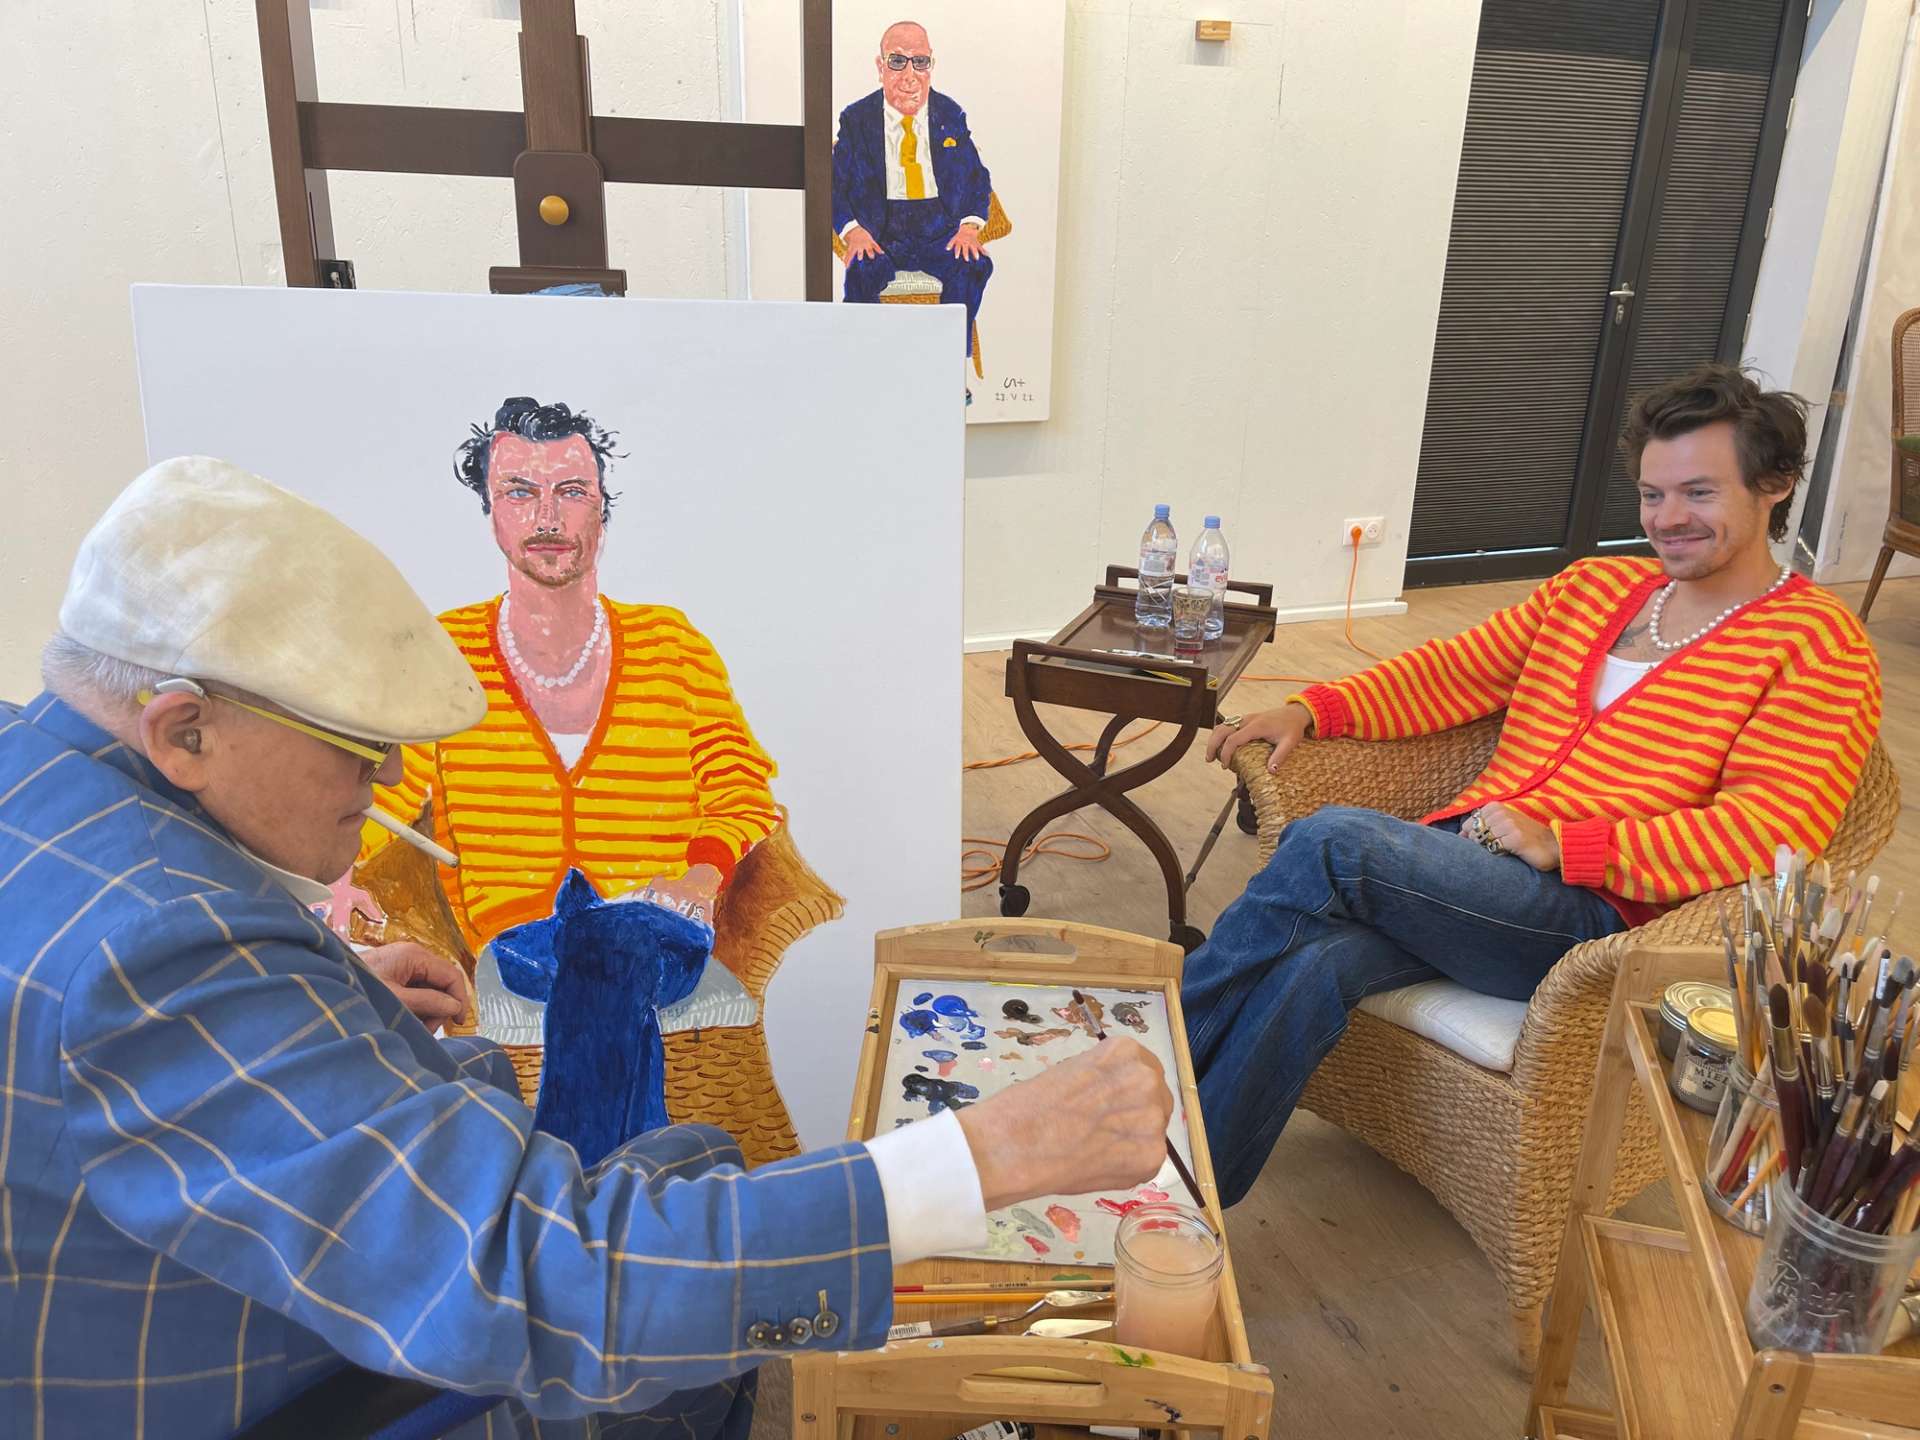 A photograph showing artist David Hockney (left) depicting pop star Harry Styles' (right) portrait which sits in between the pair.